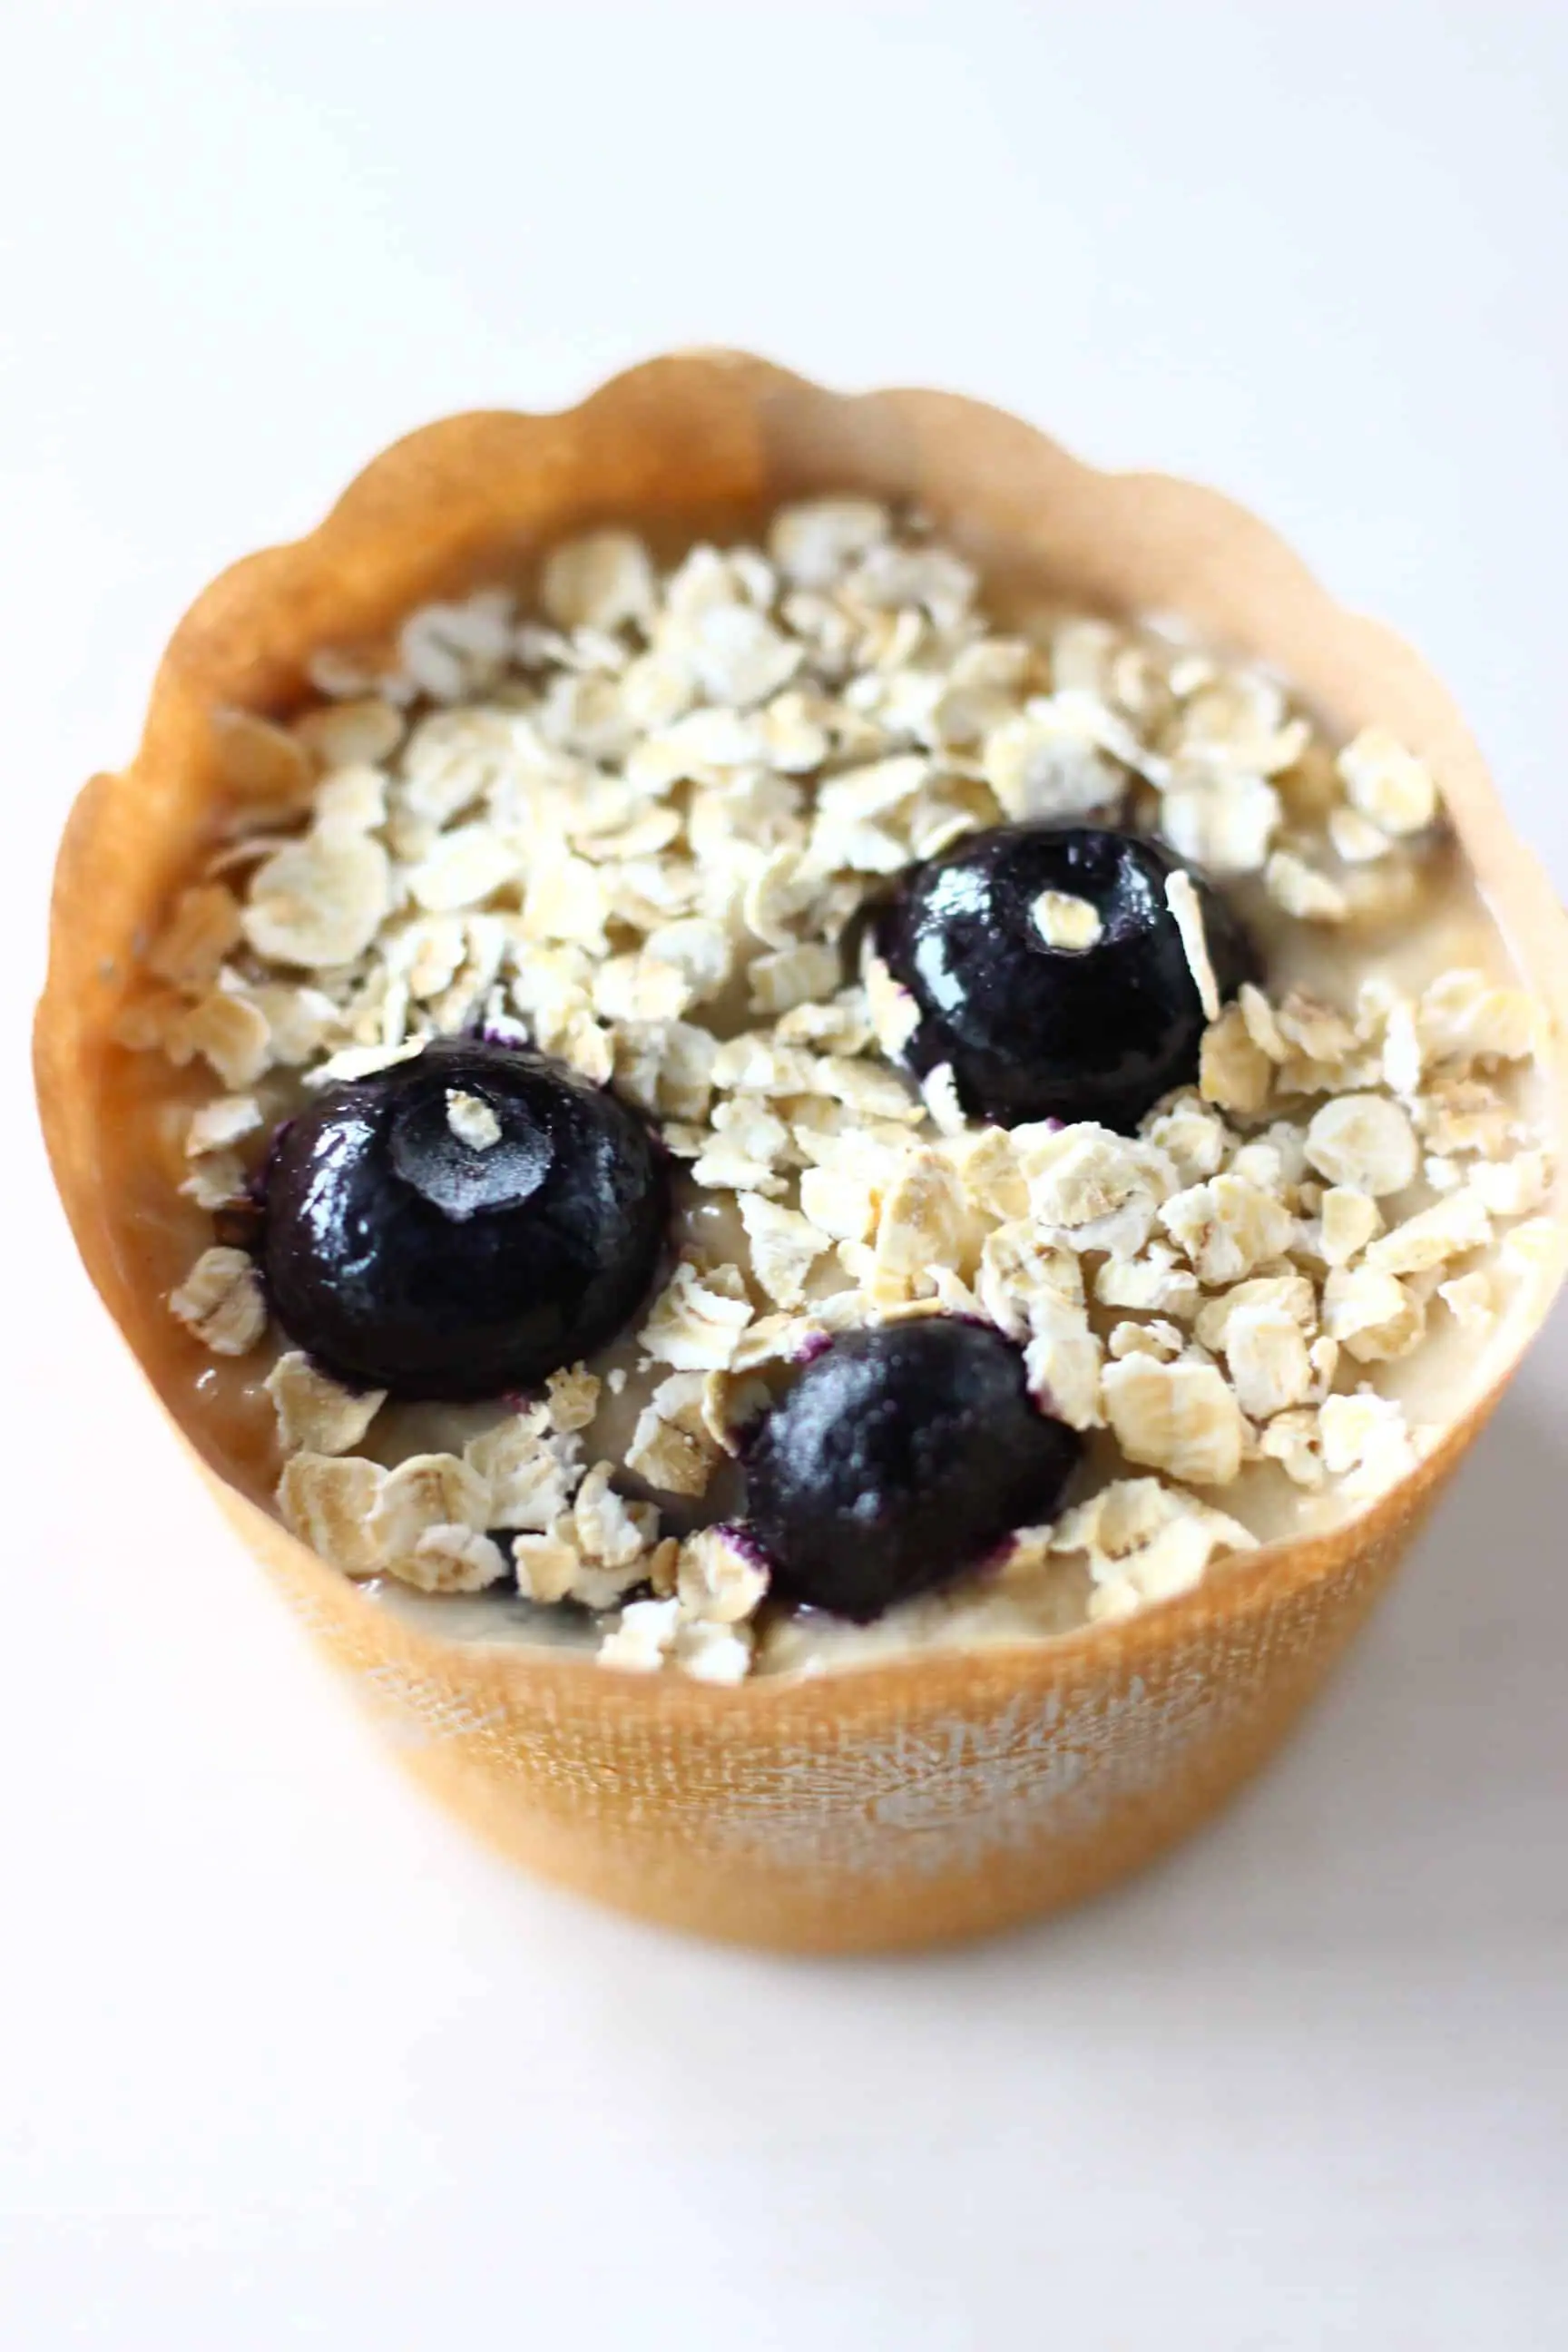 A brown muffin case filled with raw gluten-free vegan blueberry oatmeal muffin batter sprinkled with oats